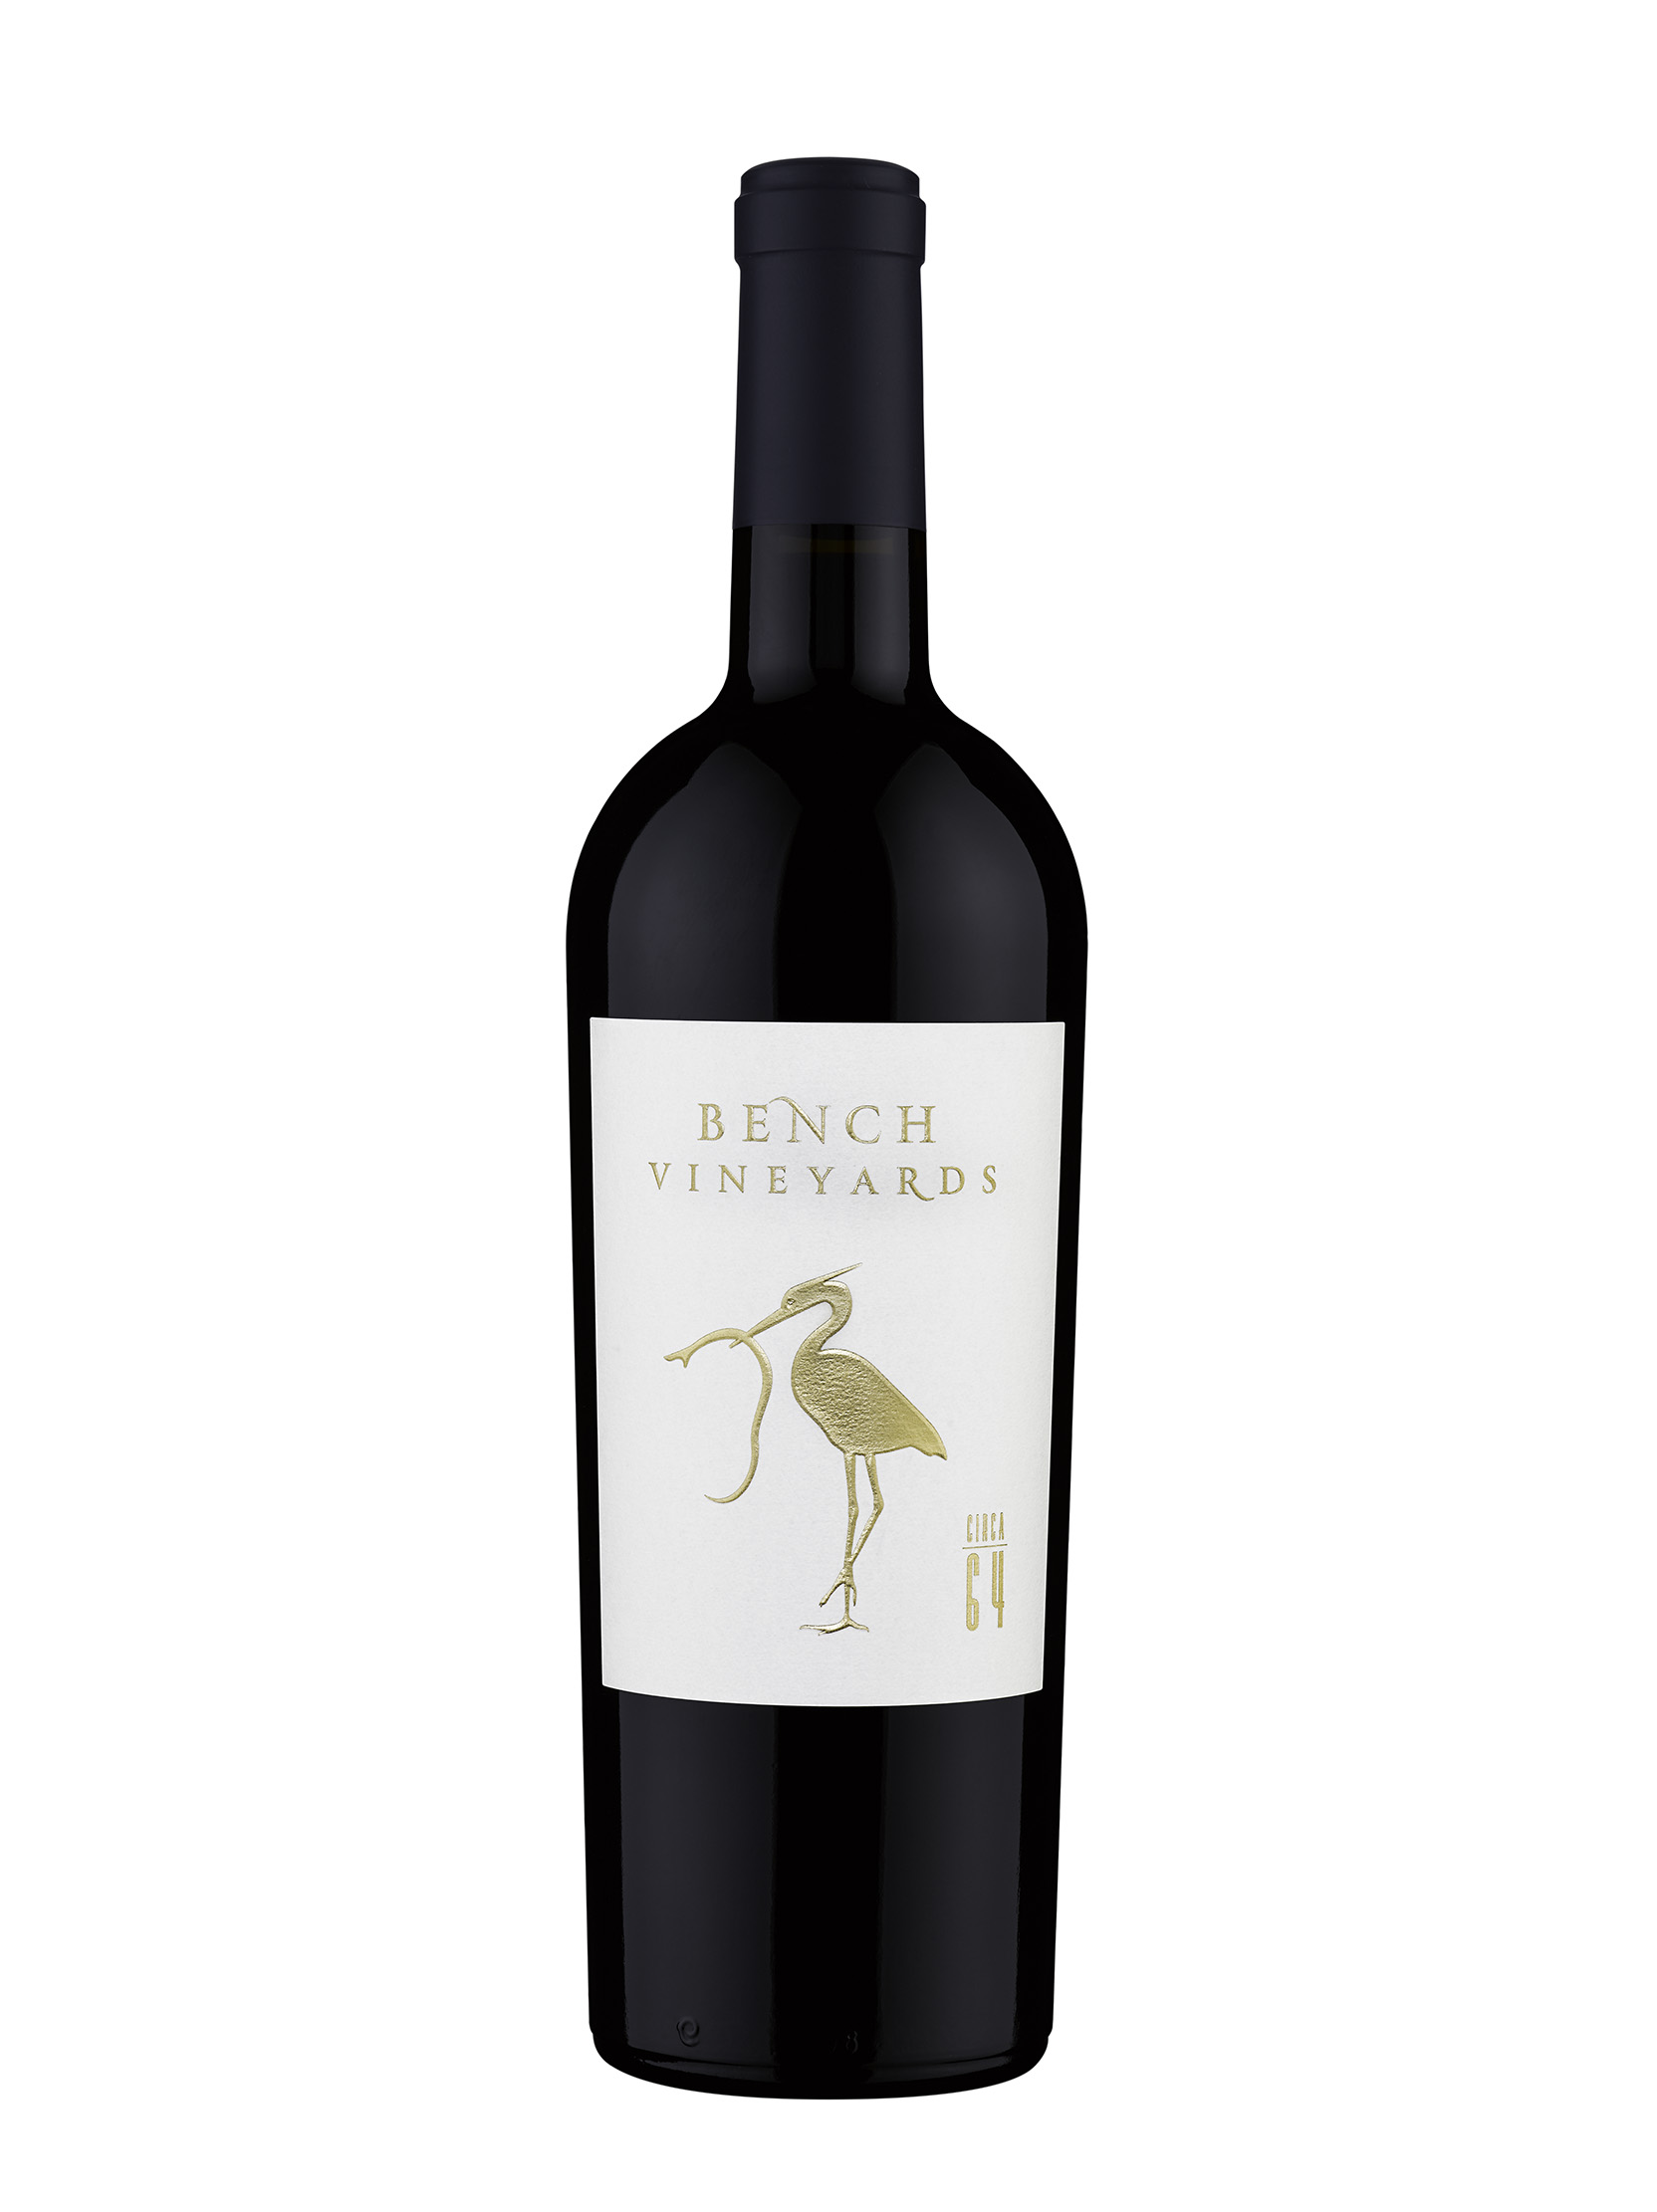 Product Image for 2018 Bench Vineyards "Circa 64" Red Wine, SLD